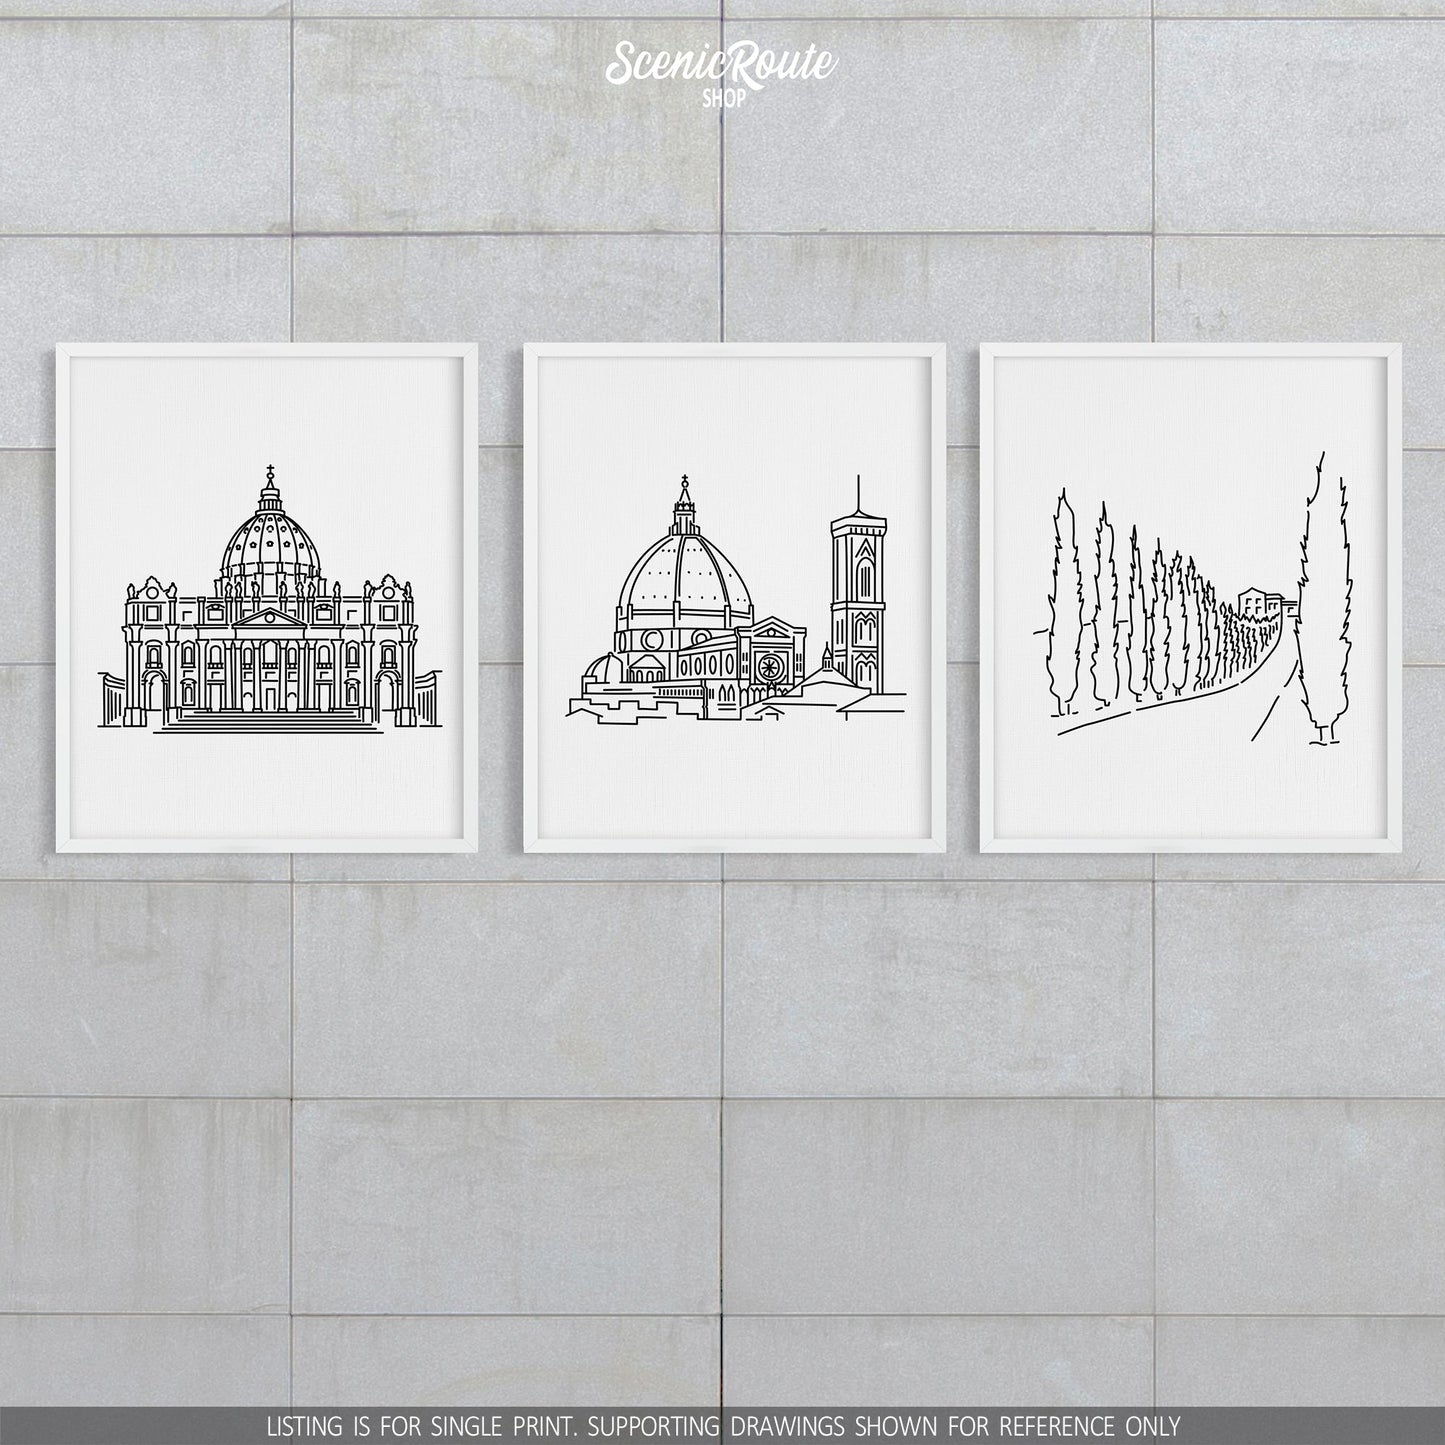 A group of three framed drawings on a block wall. The line art drawings include Saint Peters Basilica, the Florence Duomo, and a Tuscany Drive